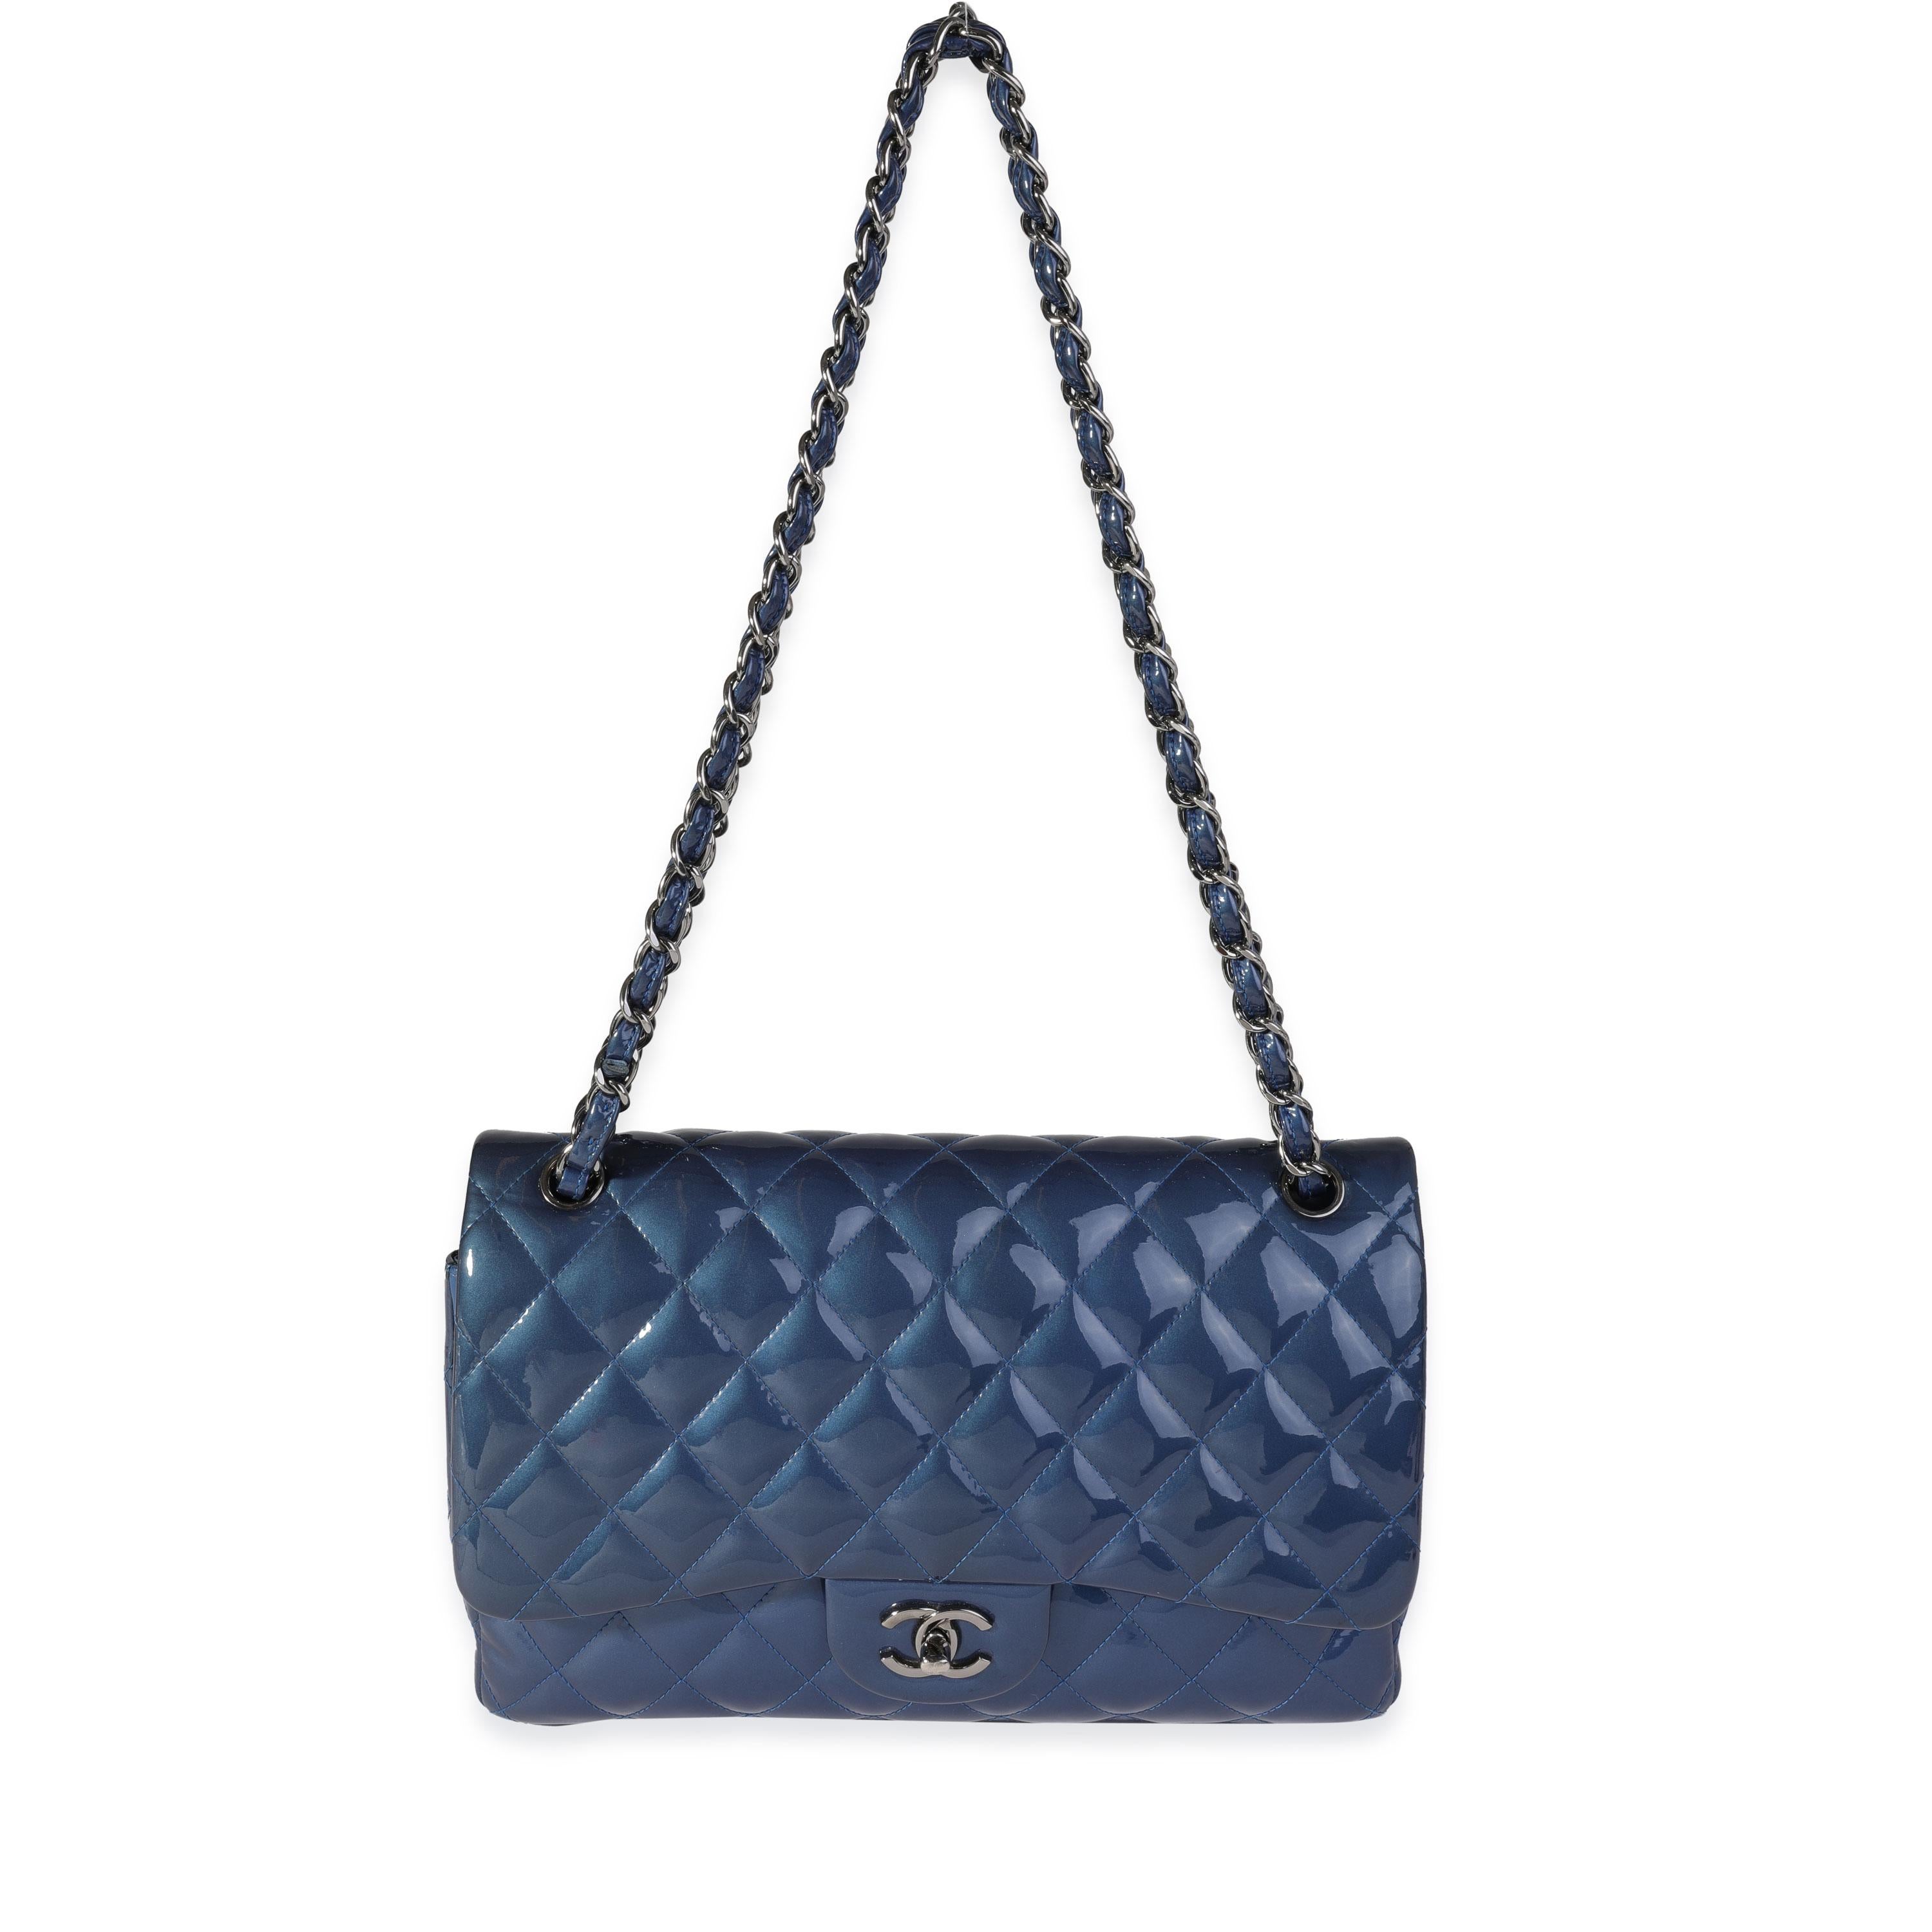 Listing Title: Chanel Blue Quilted Patent Leather Jumbo Classic Double Flap Bag
SKU: 121095
MSRP: 9500.00
Condition: Pre-owned 
Handbag Condition: Very Good
Condition Comments: Very Good Condition. Light marks to patent leather. Scratching to